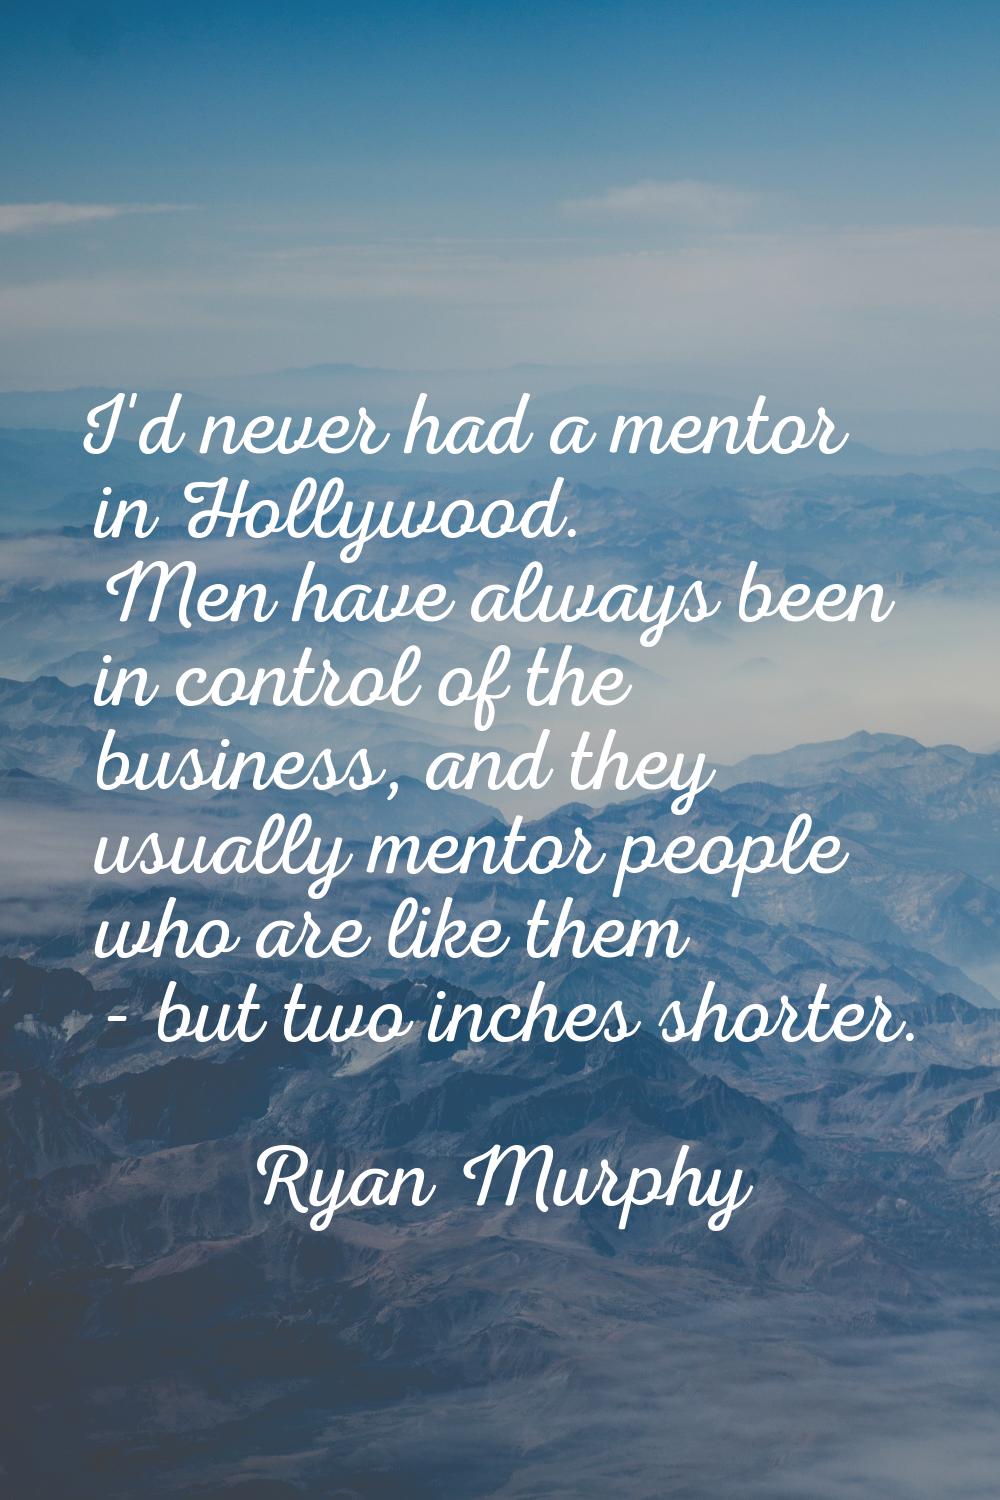 I'd never had a mentor in Hollywood. Men have always been in control of the business, and they usua